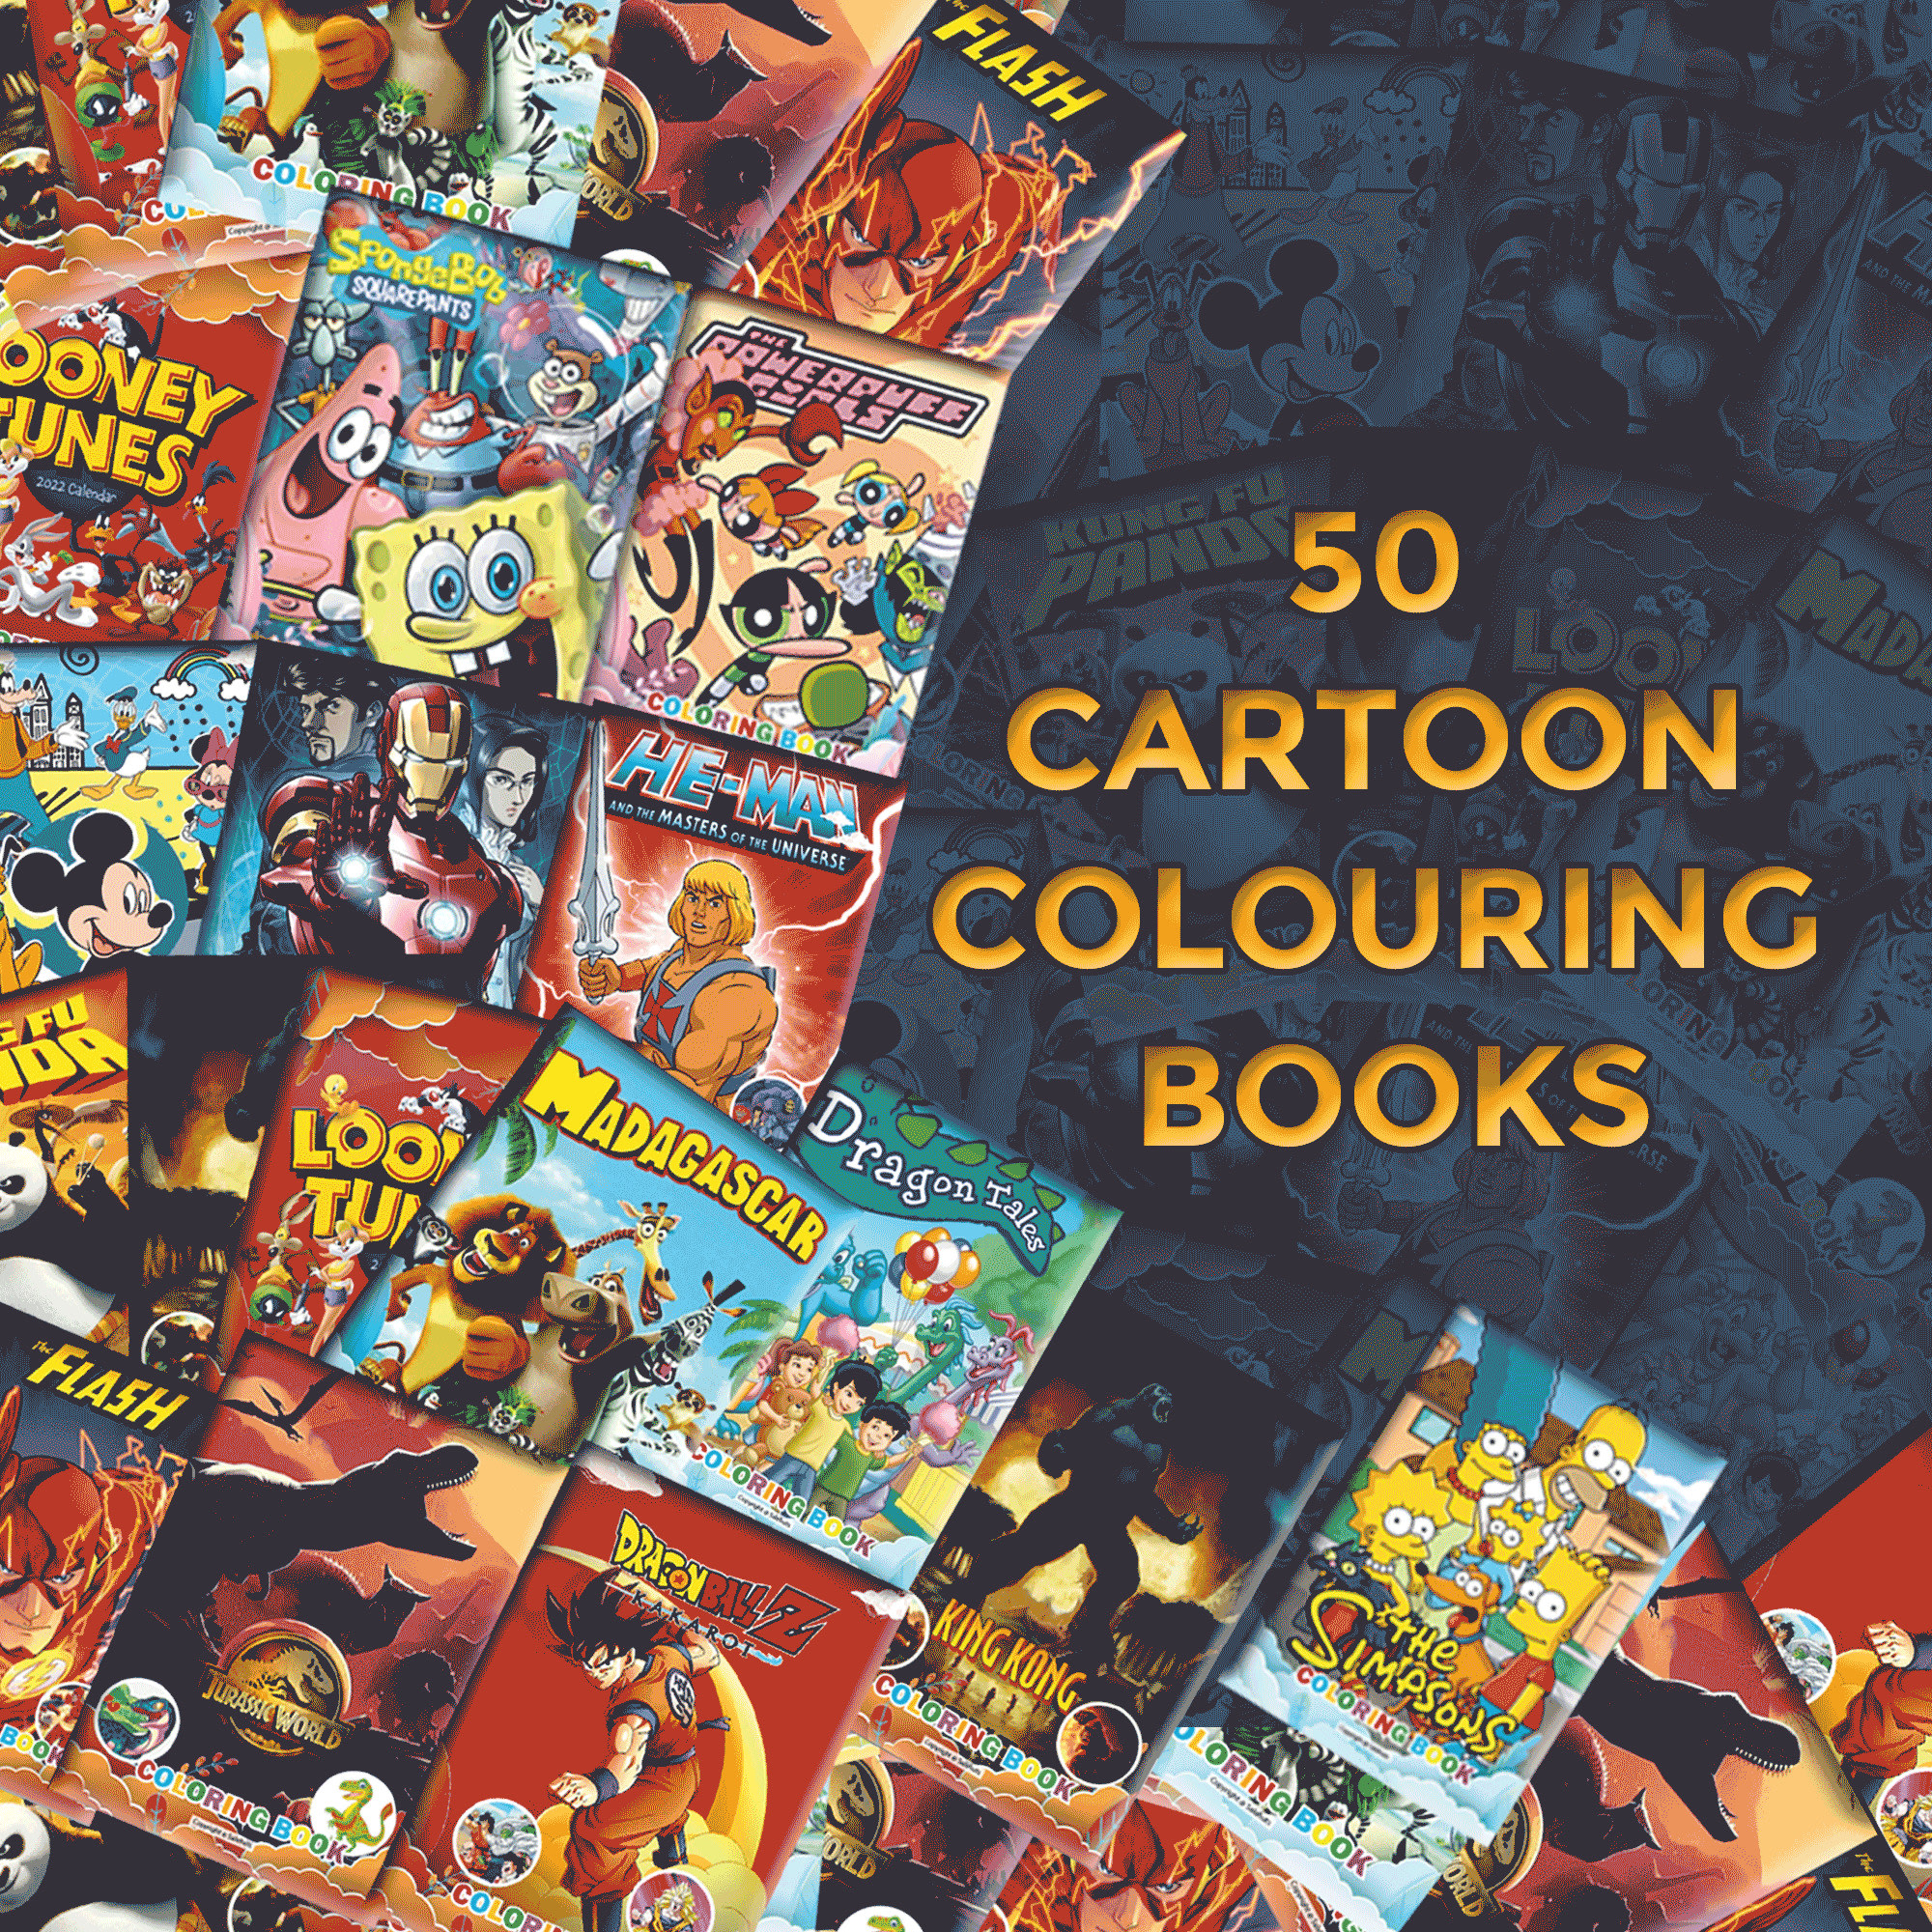 Give you 50 most popular kids cartoon coloring books having 1500 coloring  pages by Salehuts | Fiverr